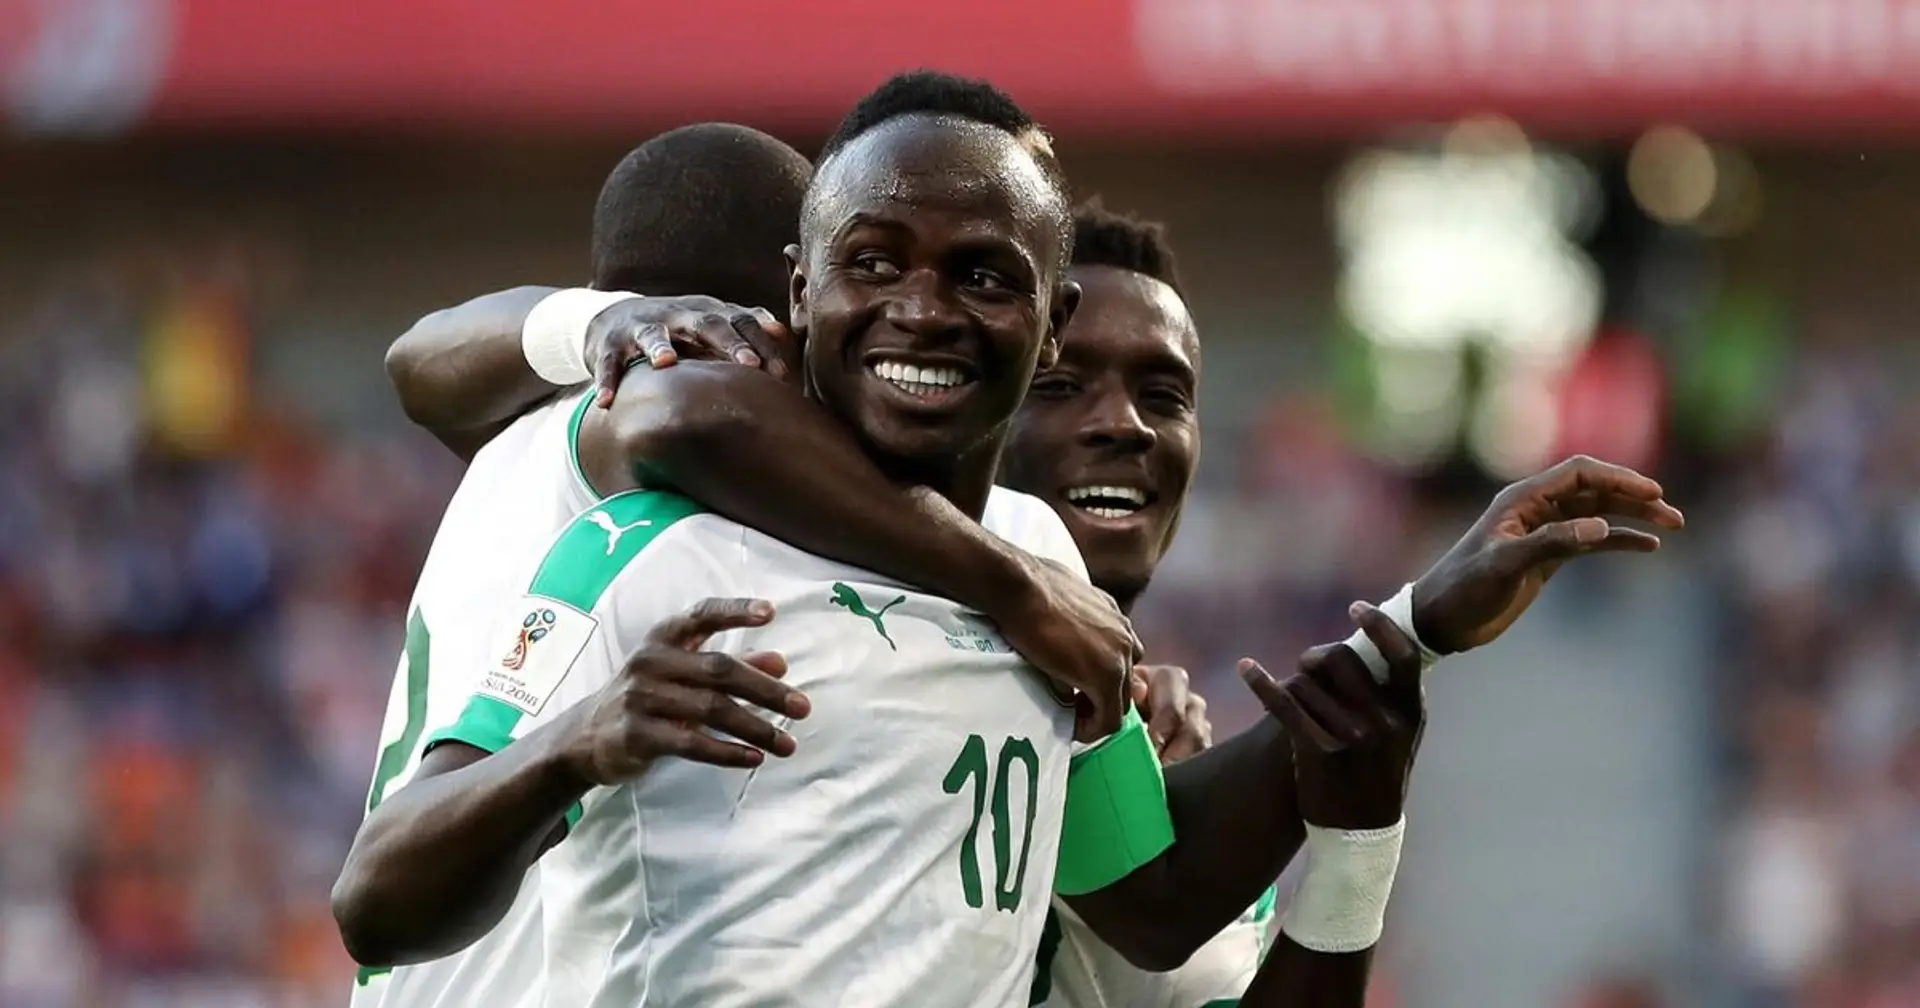 Sadio Mane reportedly flew in 50 Senegal fans for AFCON semi-final - expected to bring in more for final